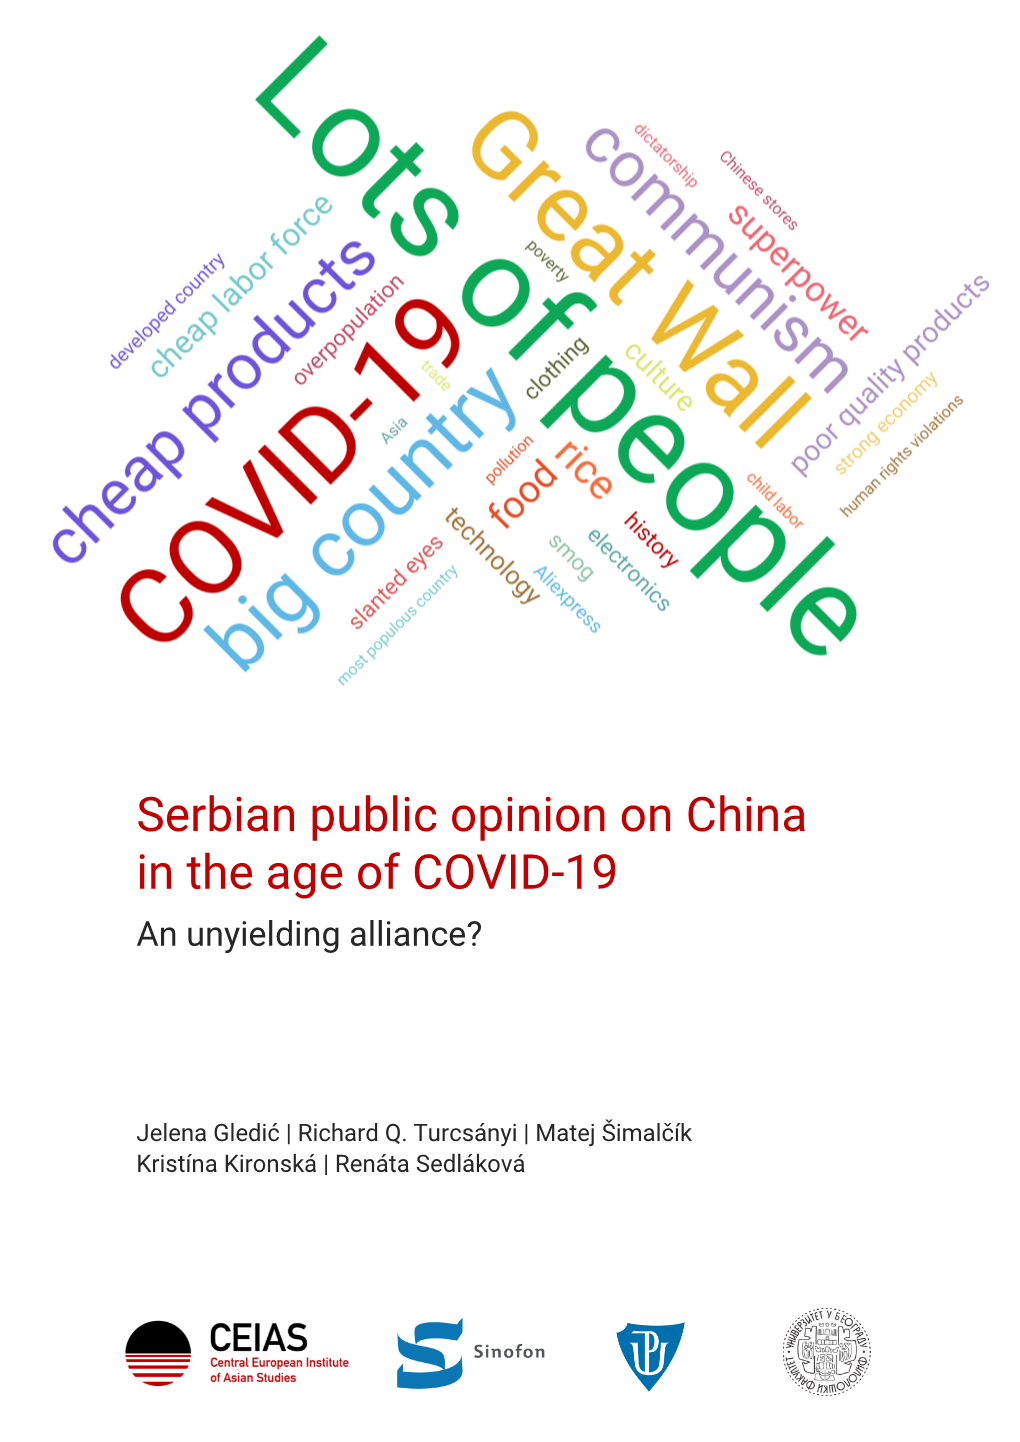 Serbian Public Opinion on China in the Age of COVID-19 an Unyielding Alliance?